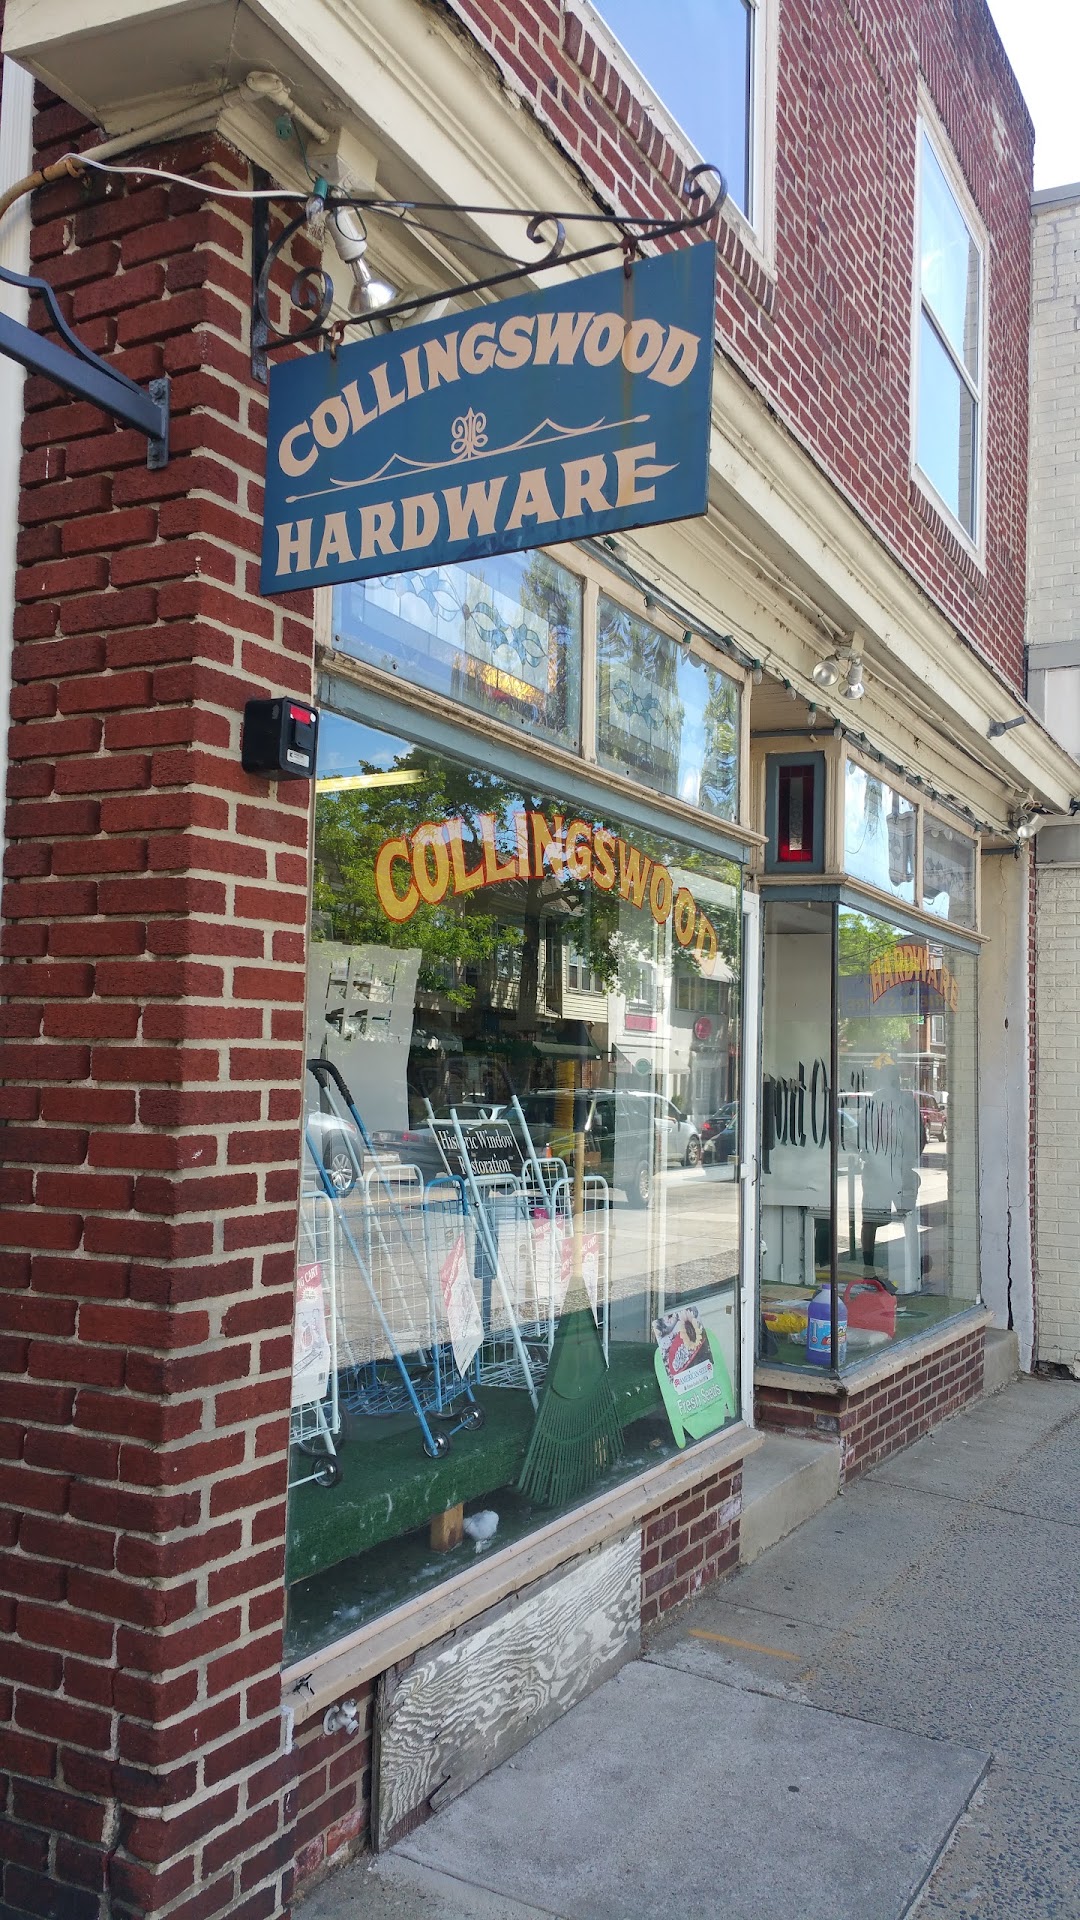 Collingswood Hardware